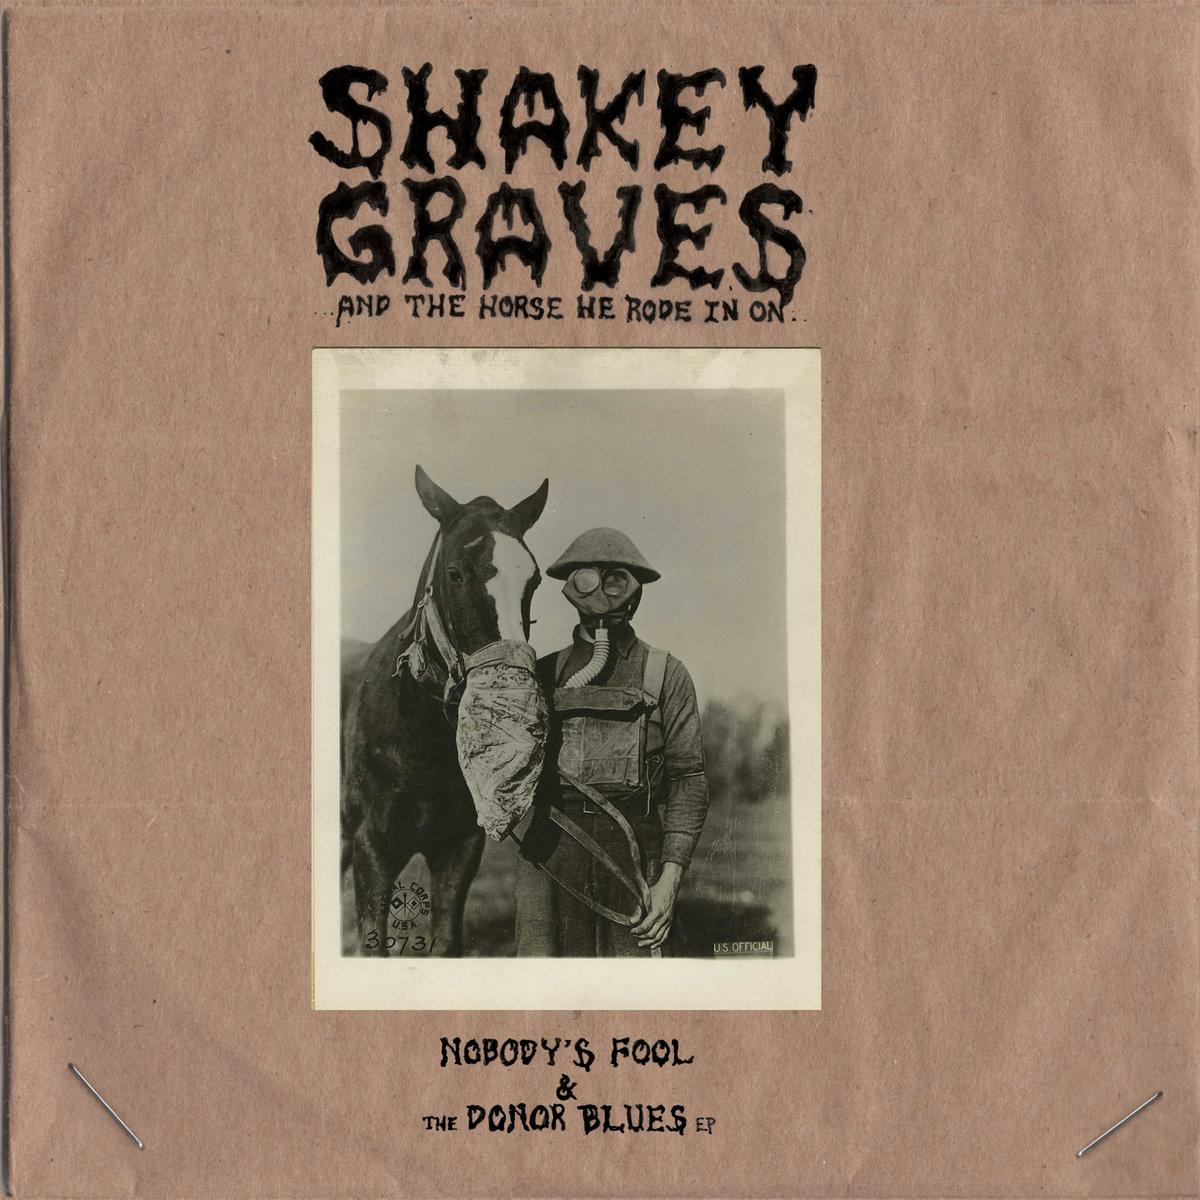 Shakey Graves And The Horse He Rode In On